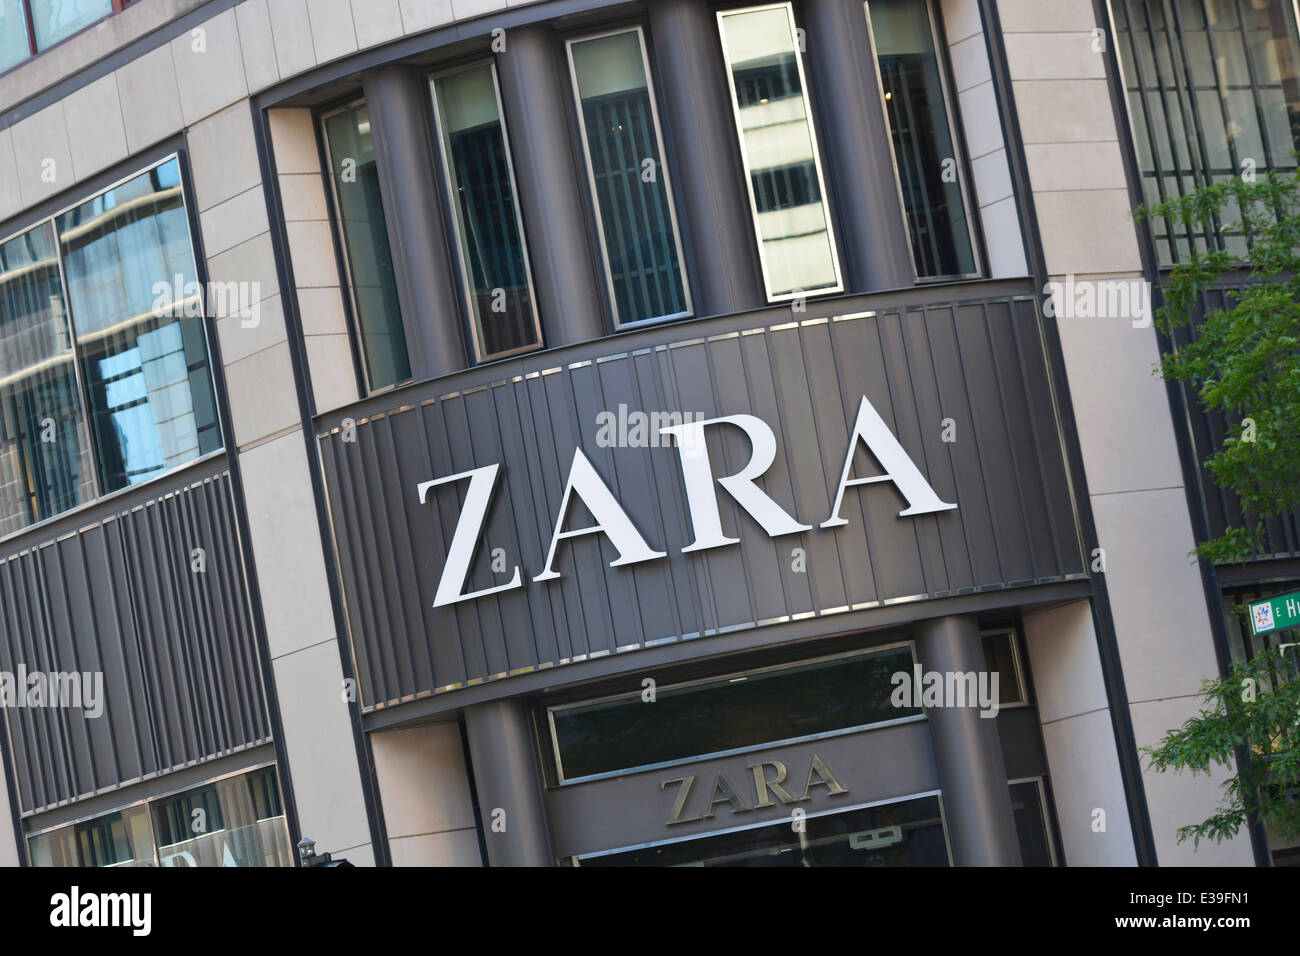 Zara Store High Resolution Stock Photography and Images - Alamy